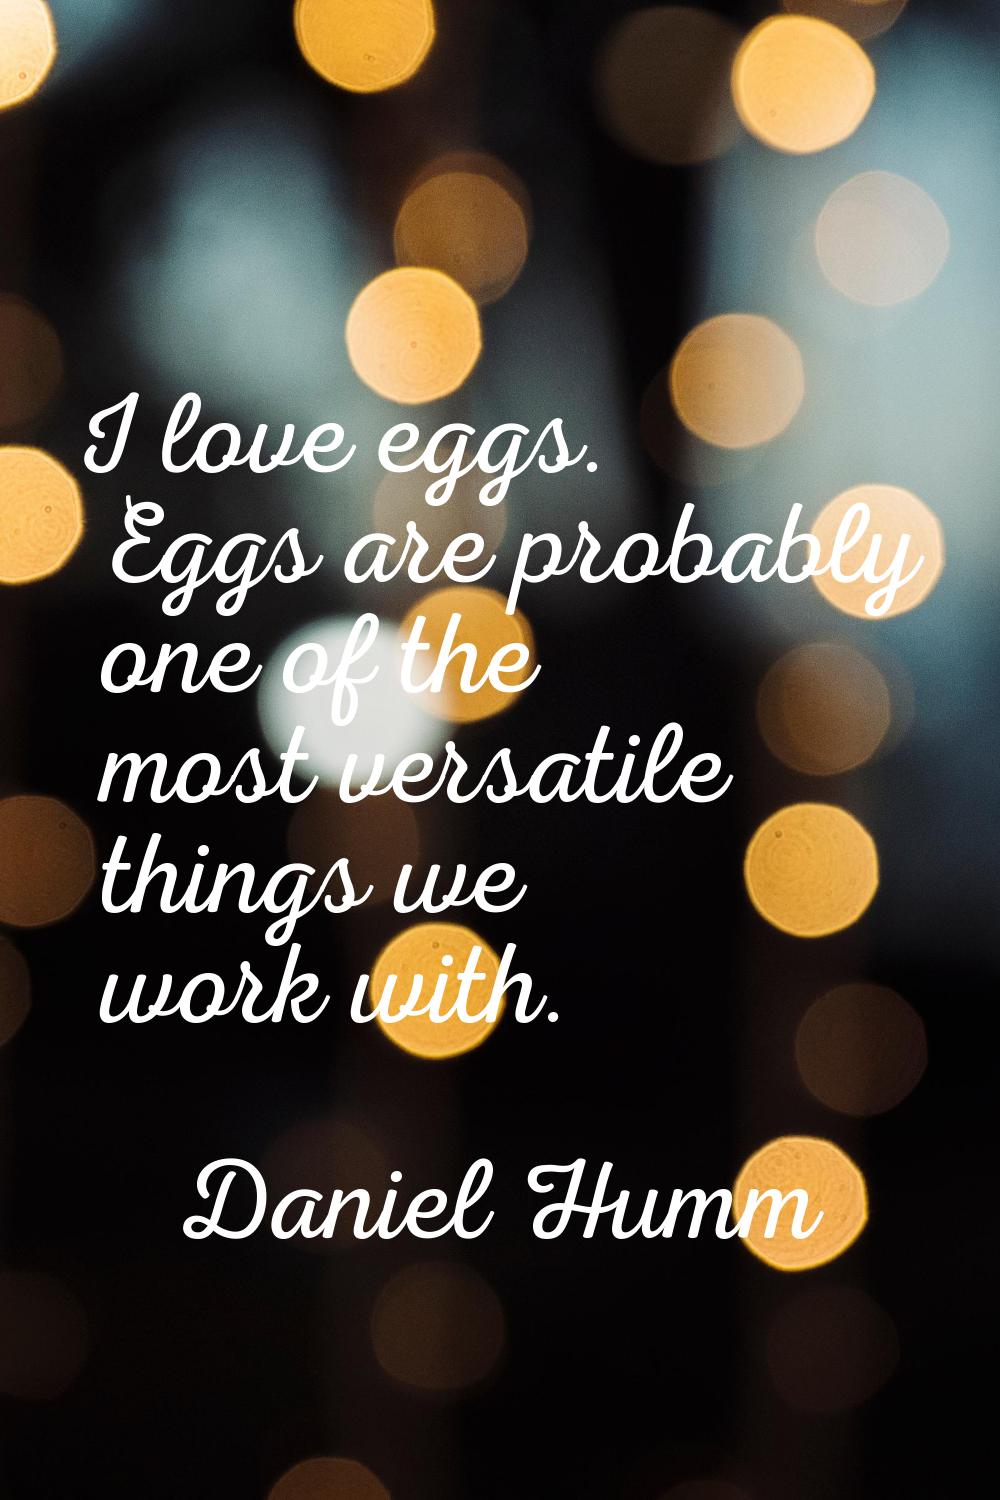 I love eggs. Eggs are probably one of the most versatile things we work with.